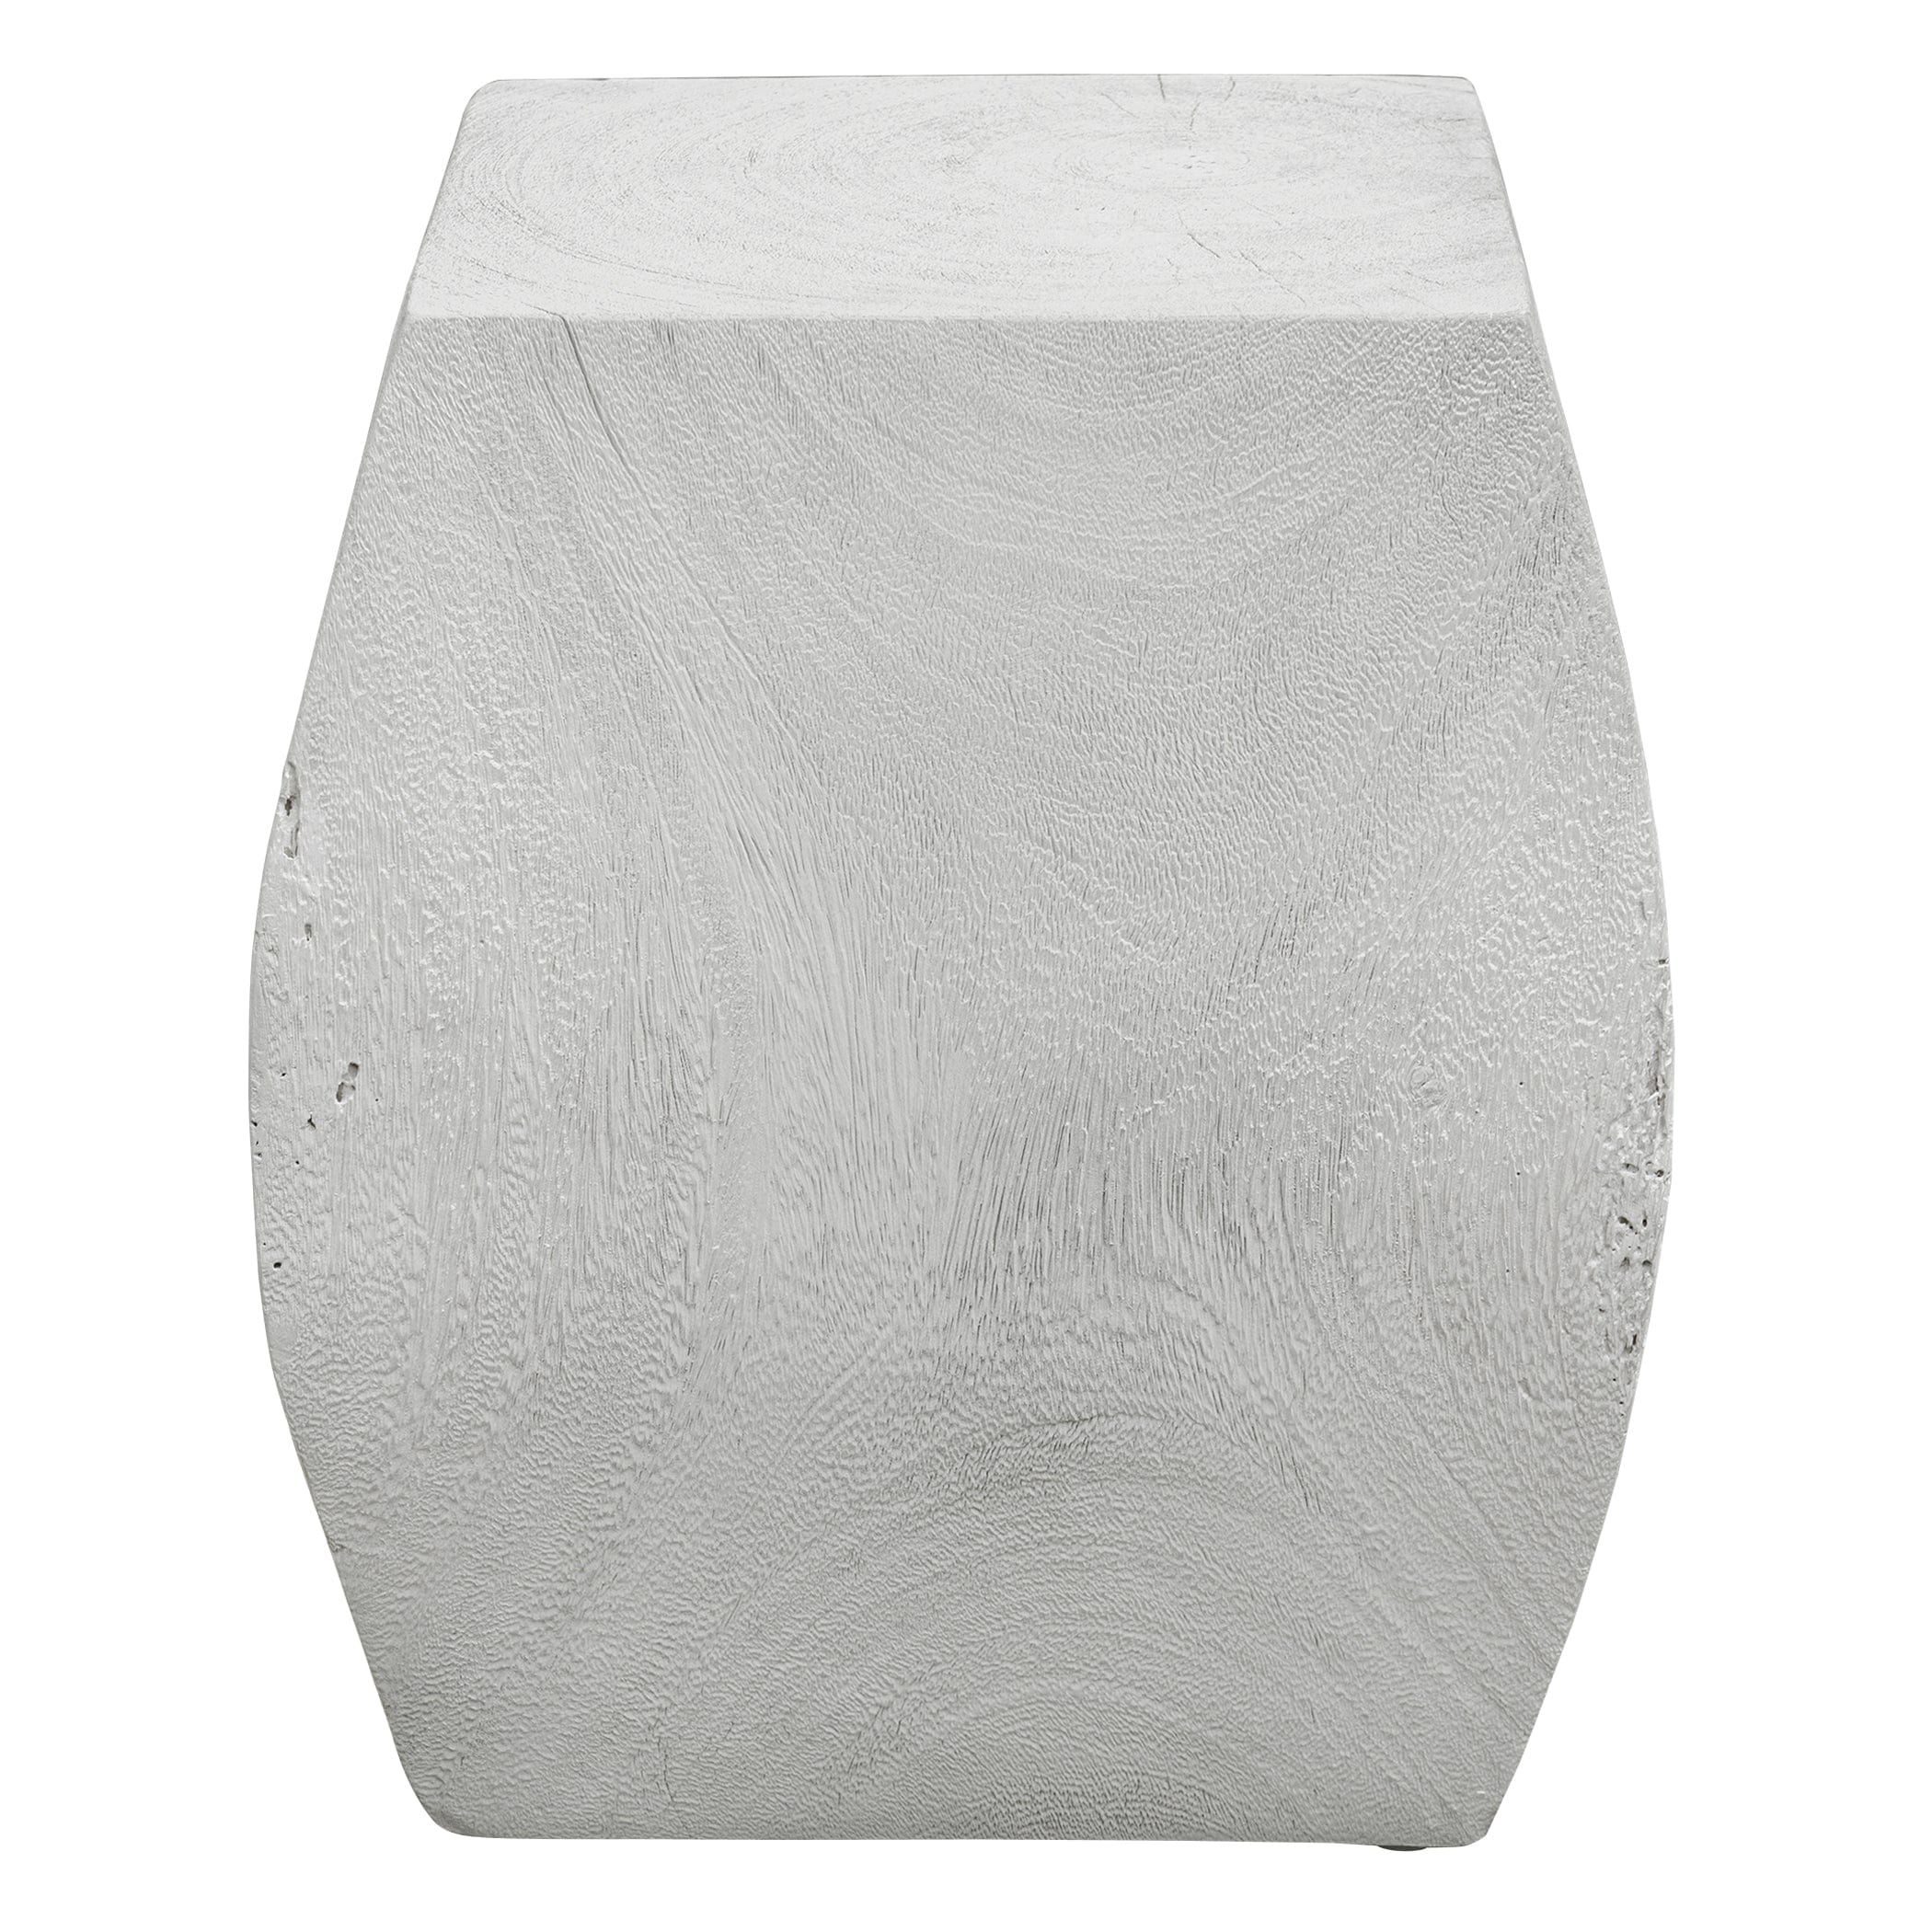 Grove Ivory Wooden Accent Stool Uttermost